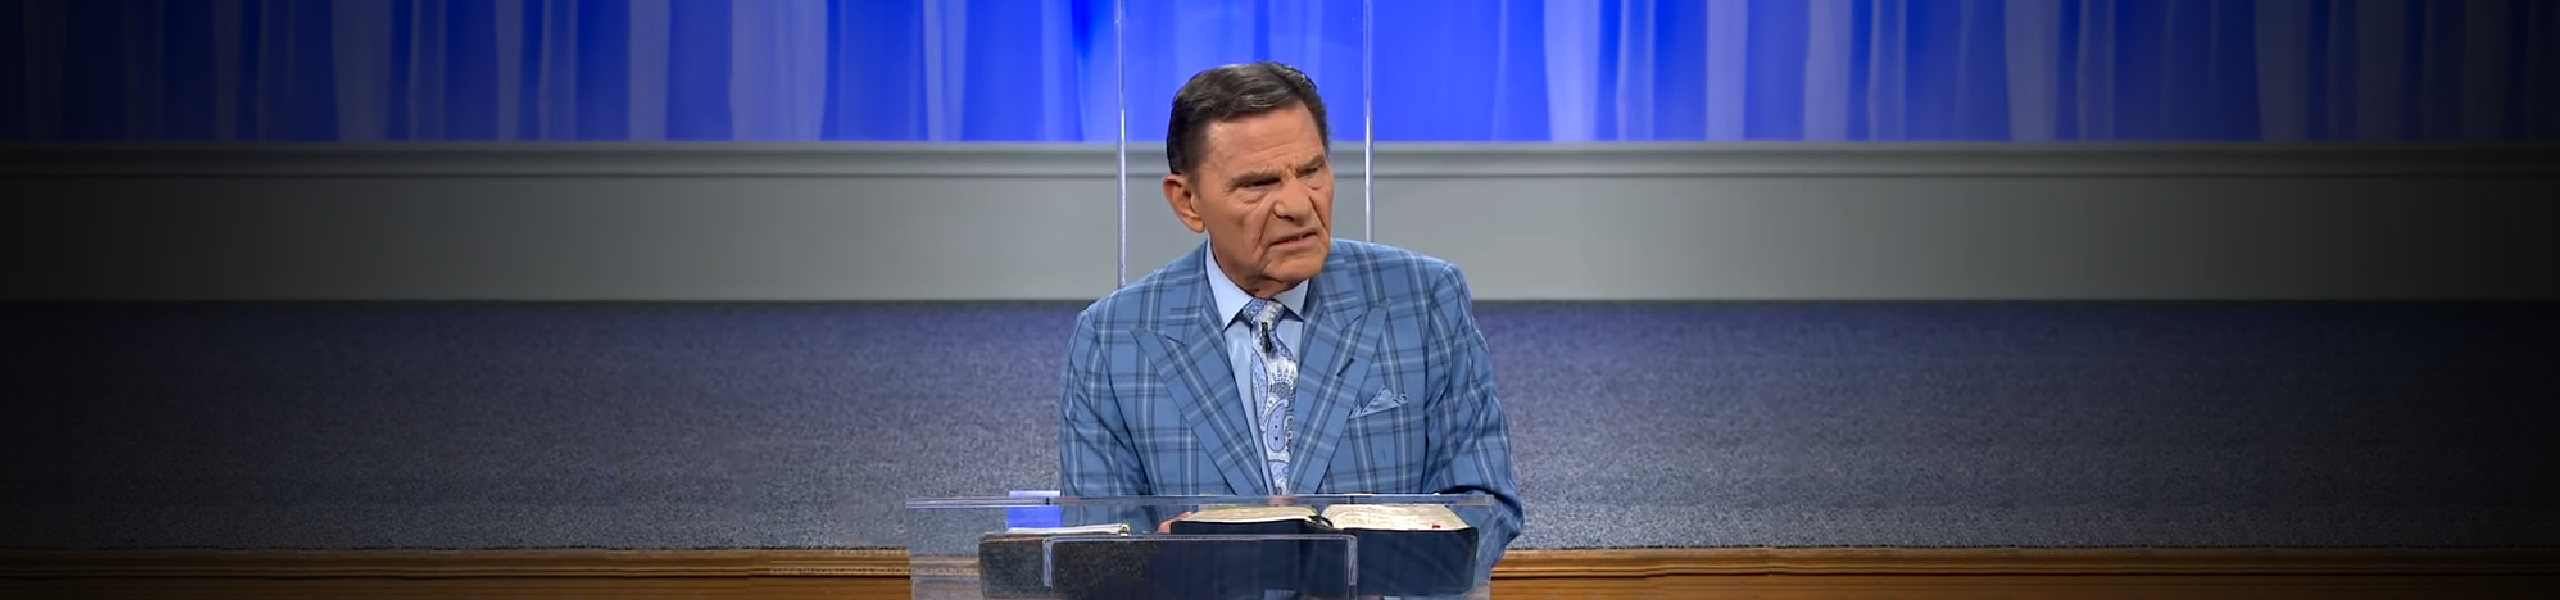 Kenneth Copeland And You on The Mountain | Eagle Mountain International Church